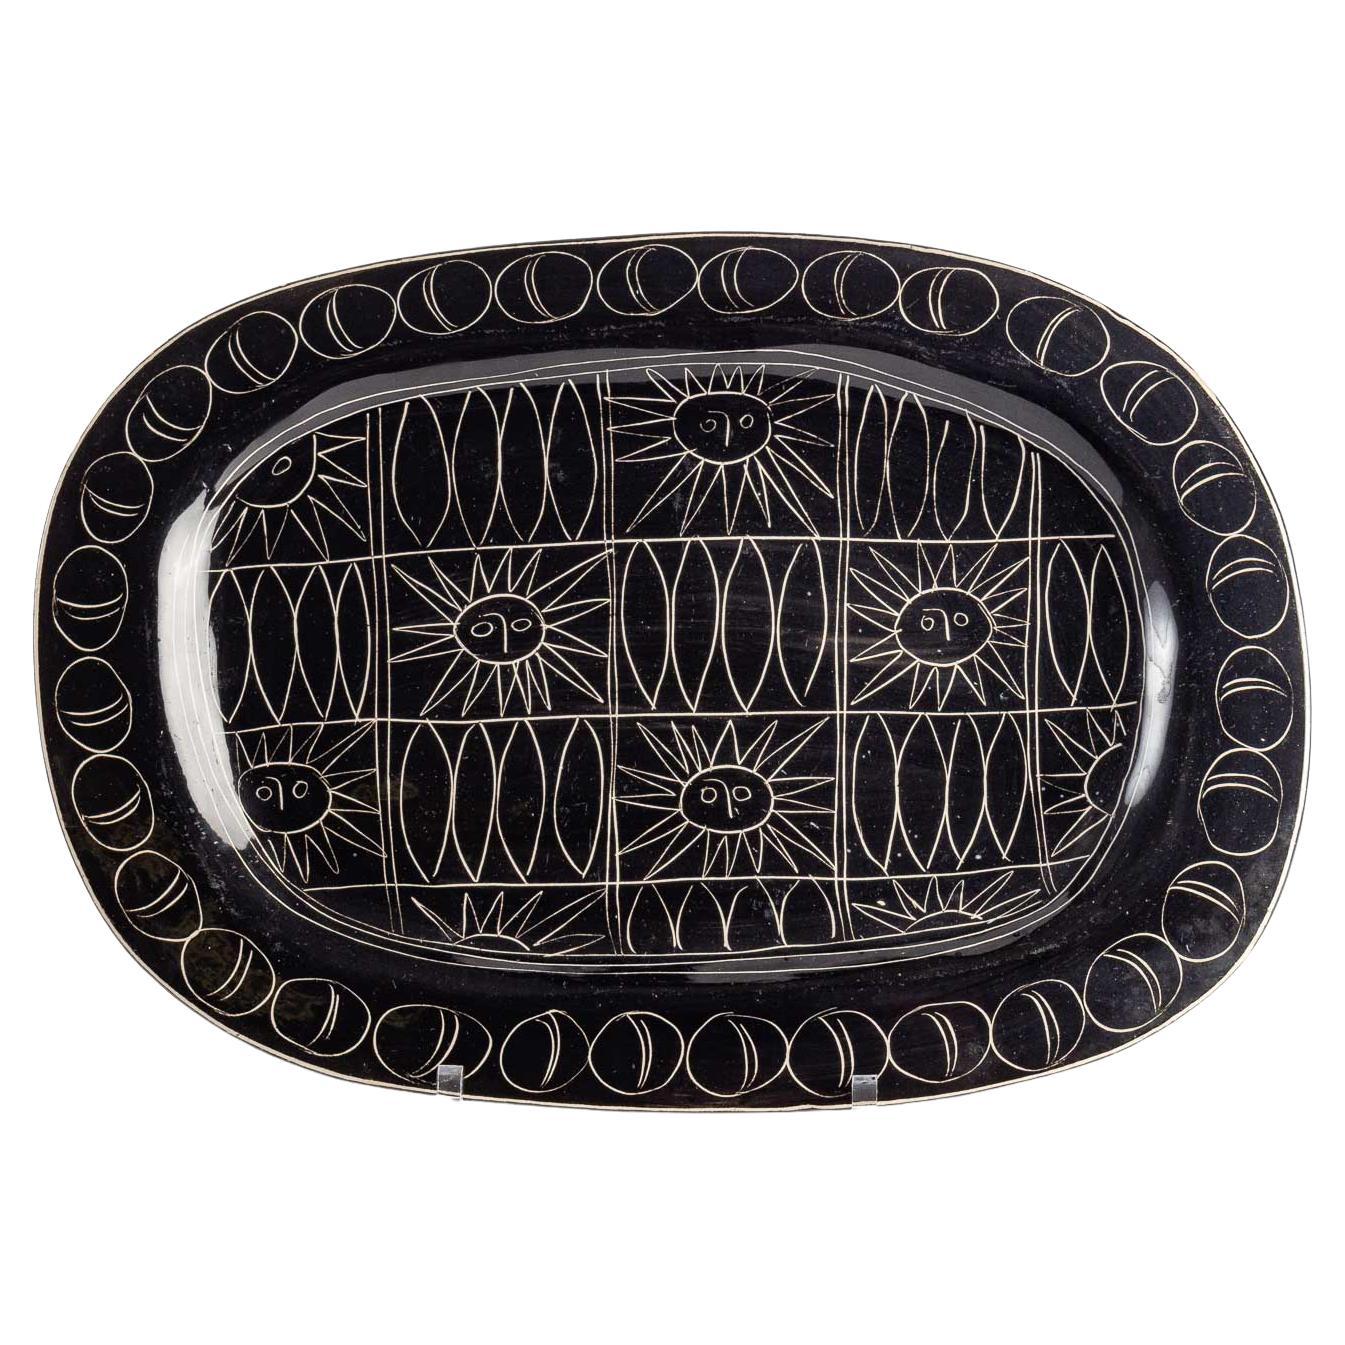 Ceramic Oval Dish with Suns